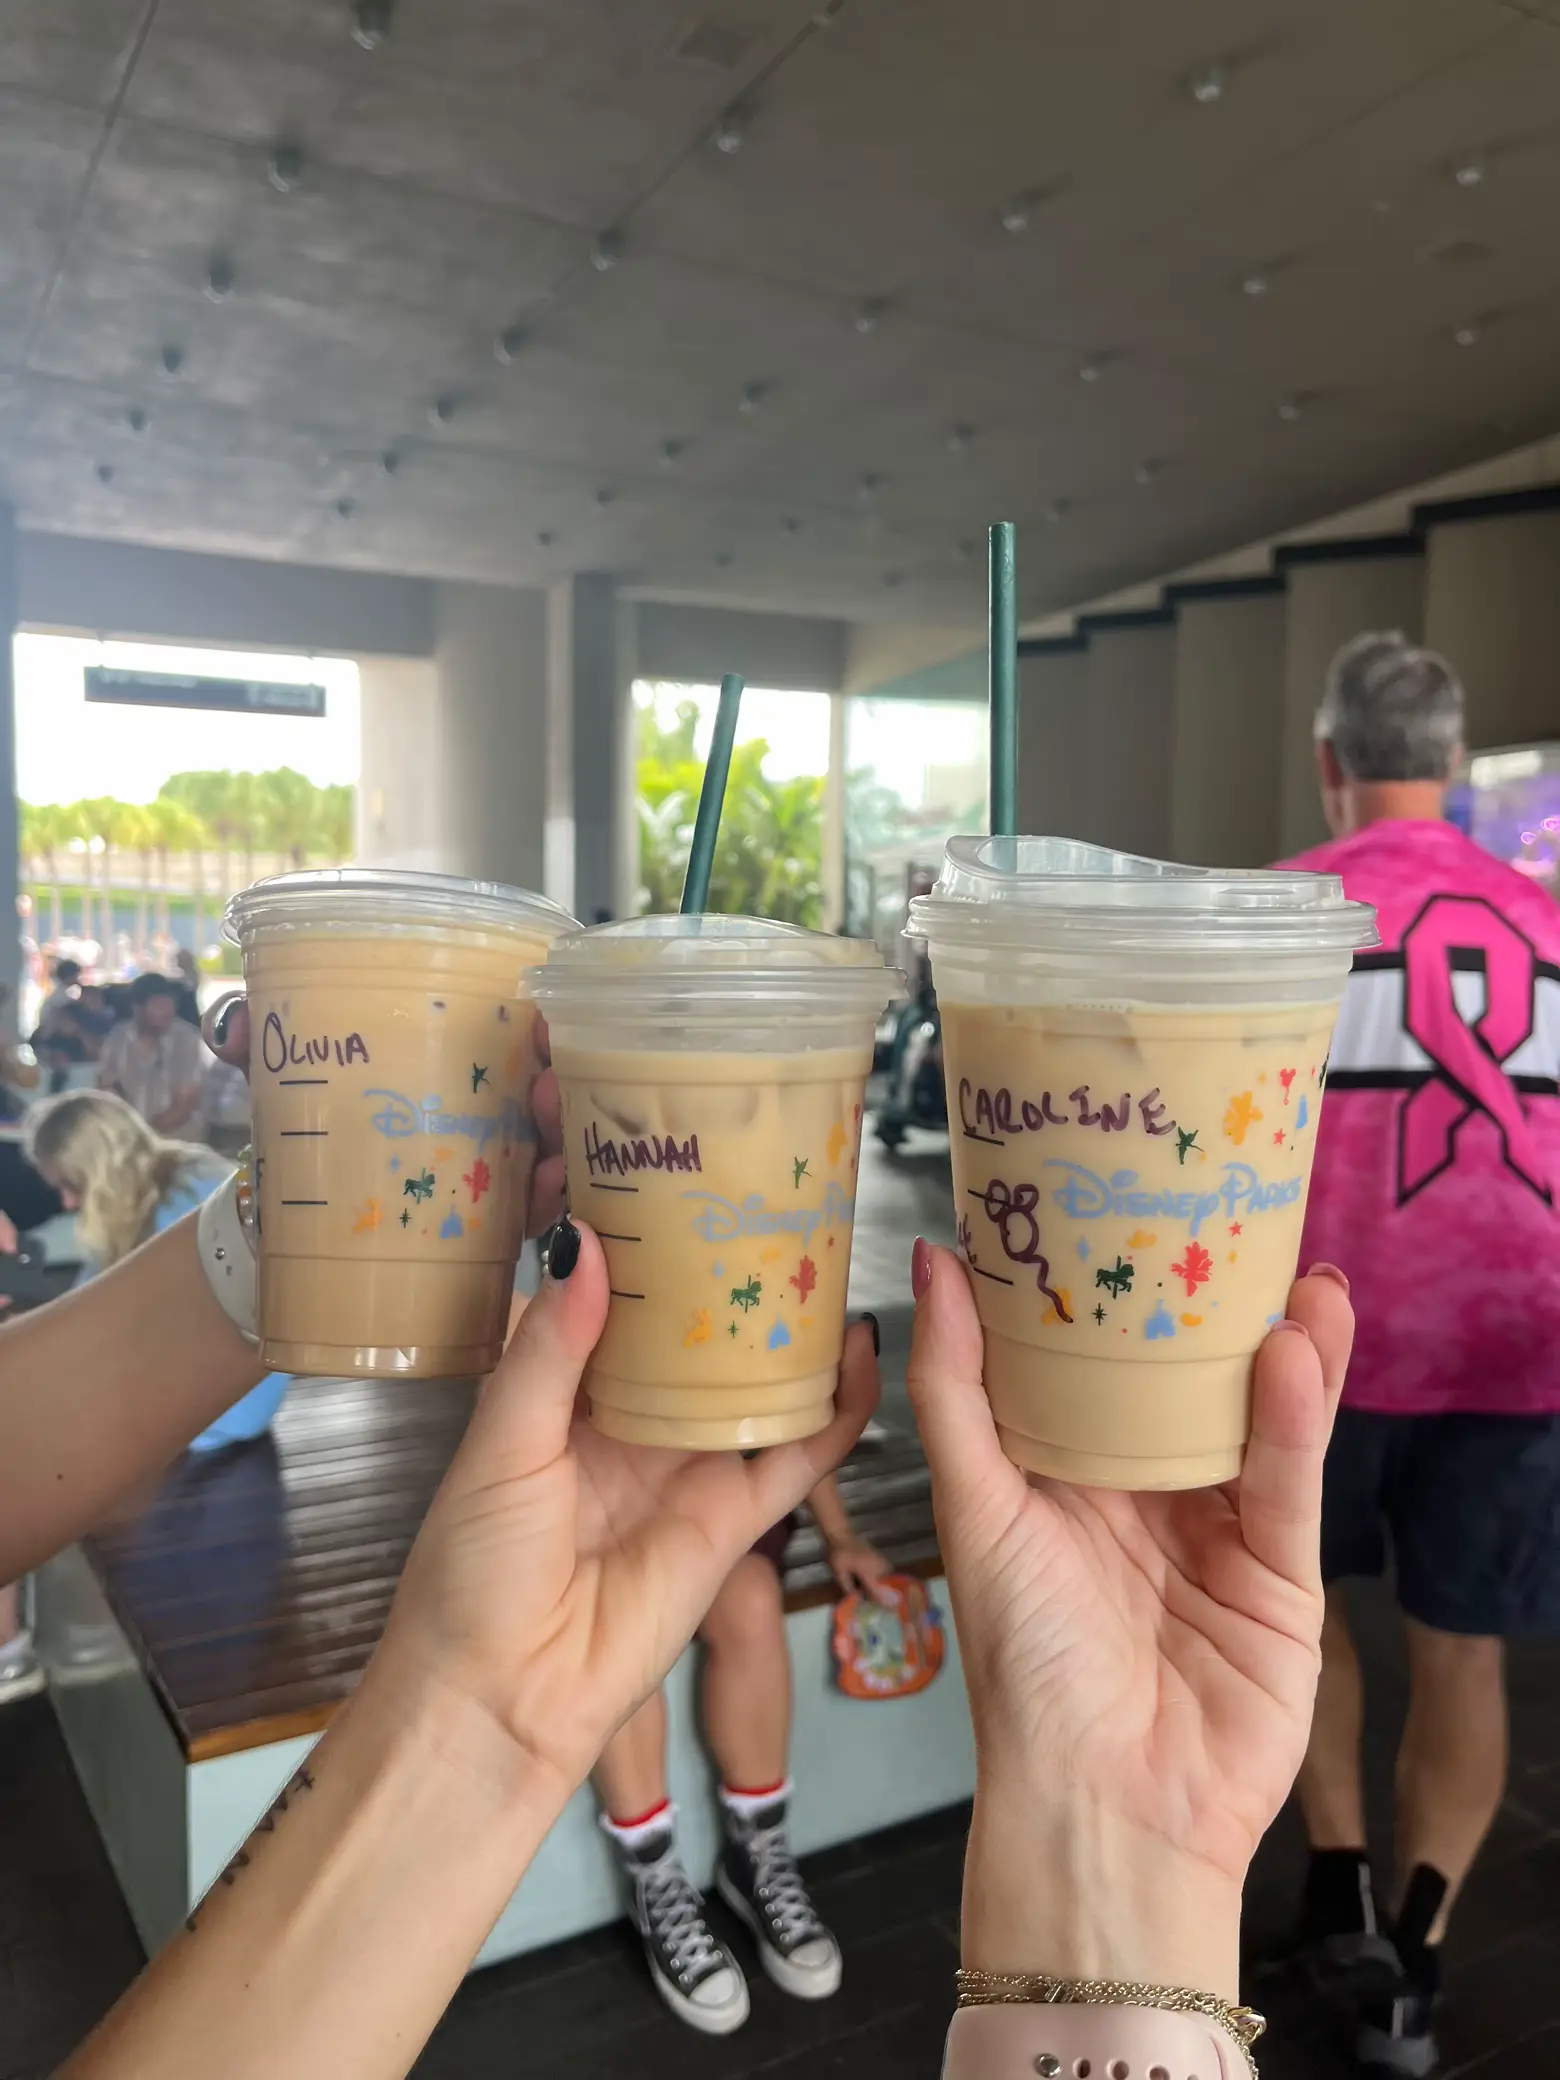  Four people are holding Starbucks drinks in their hands.